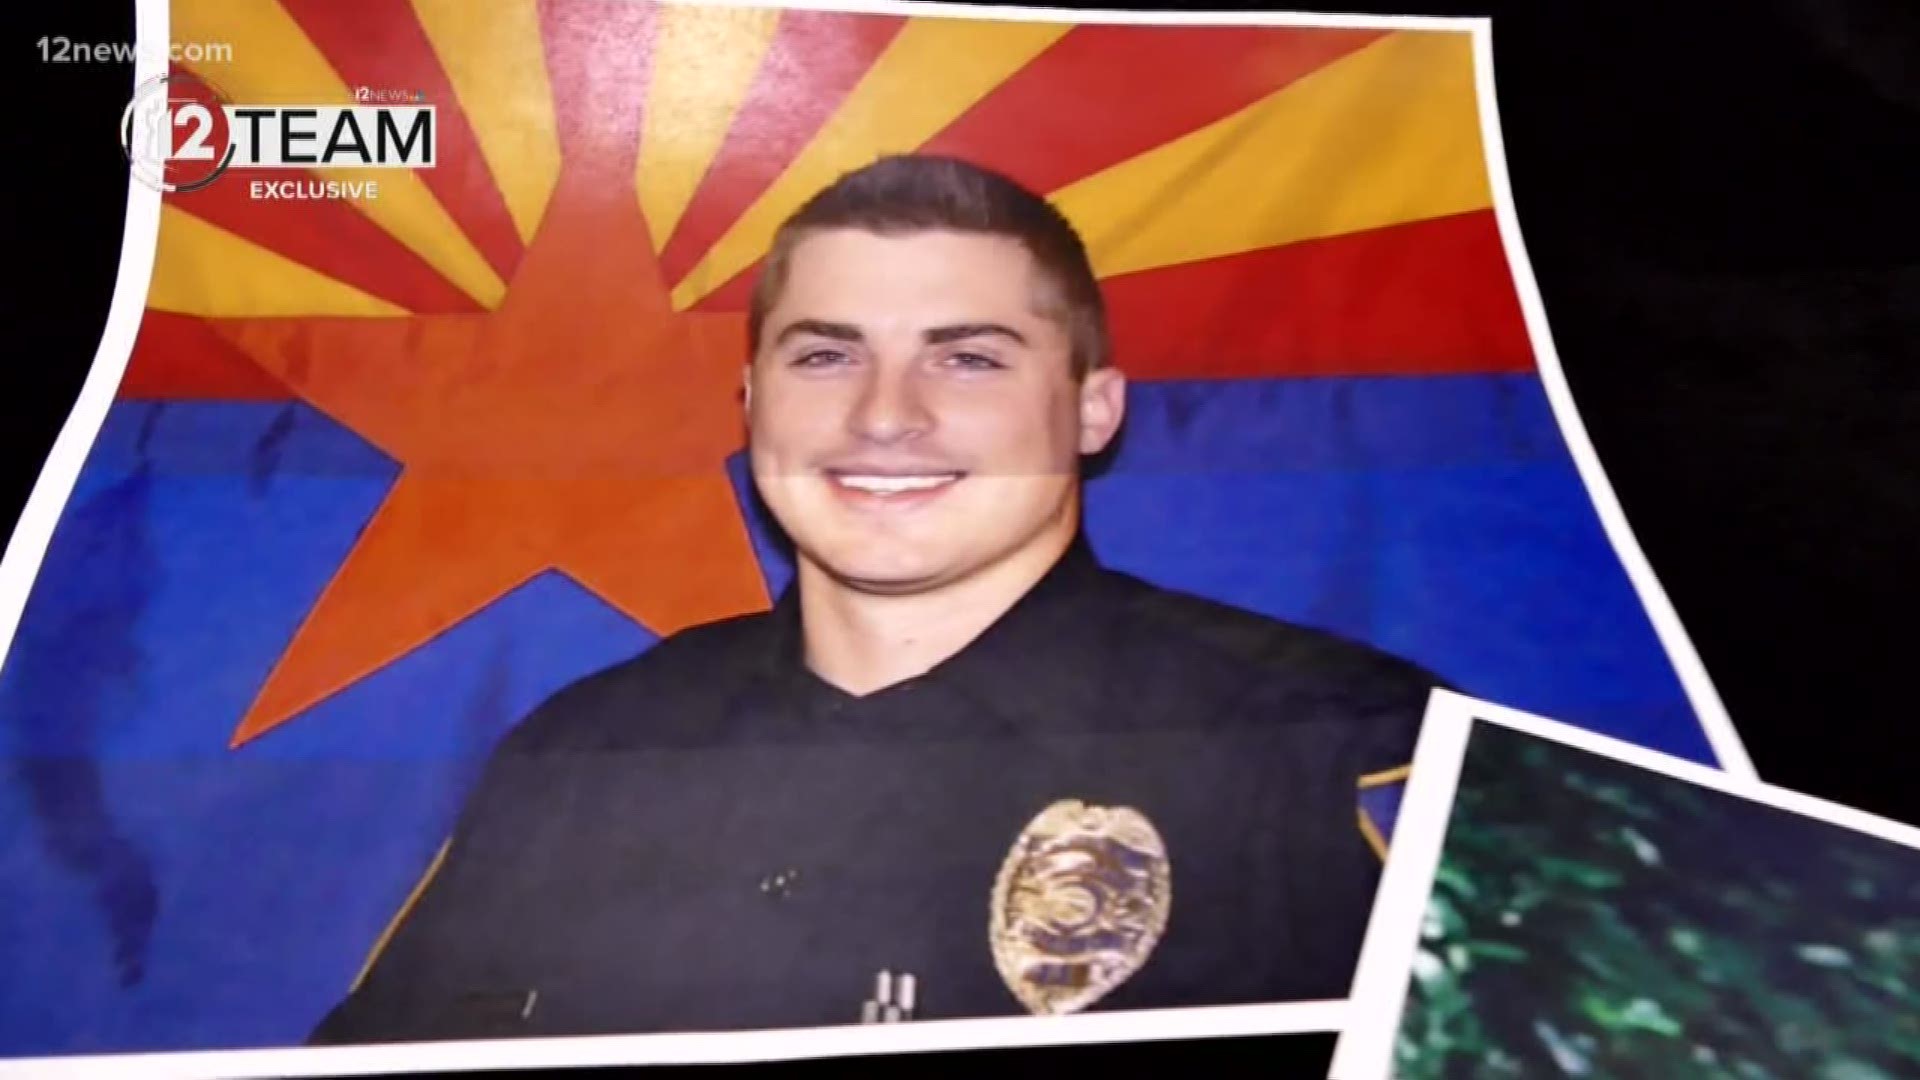 Officer Daniel Beckwith became one of 228 police officers across the country to die by suicide in 2019. His family doesn’t want him to be just another statistic.